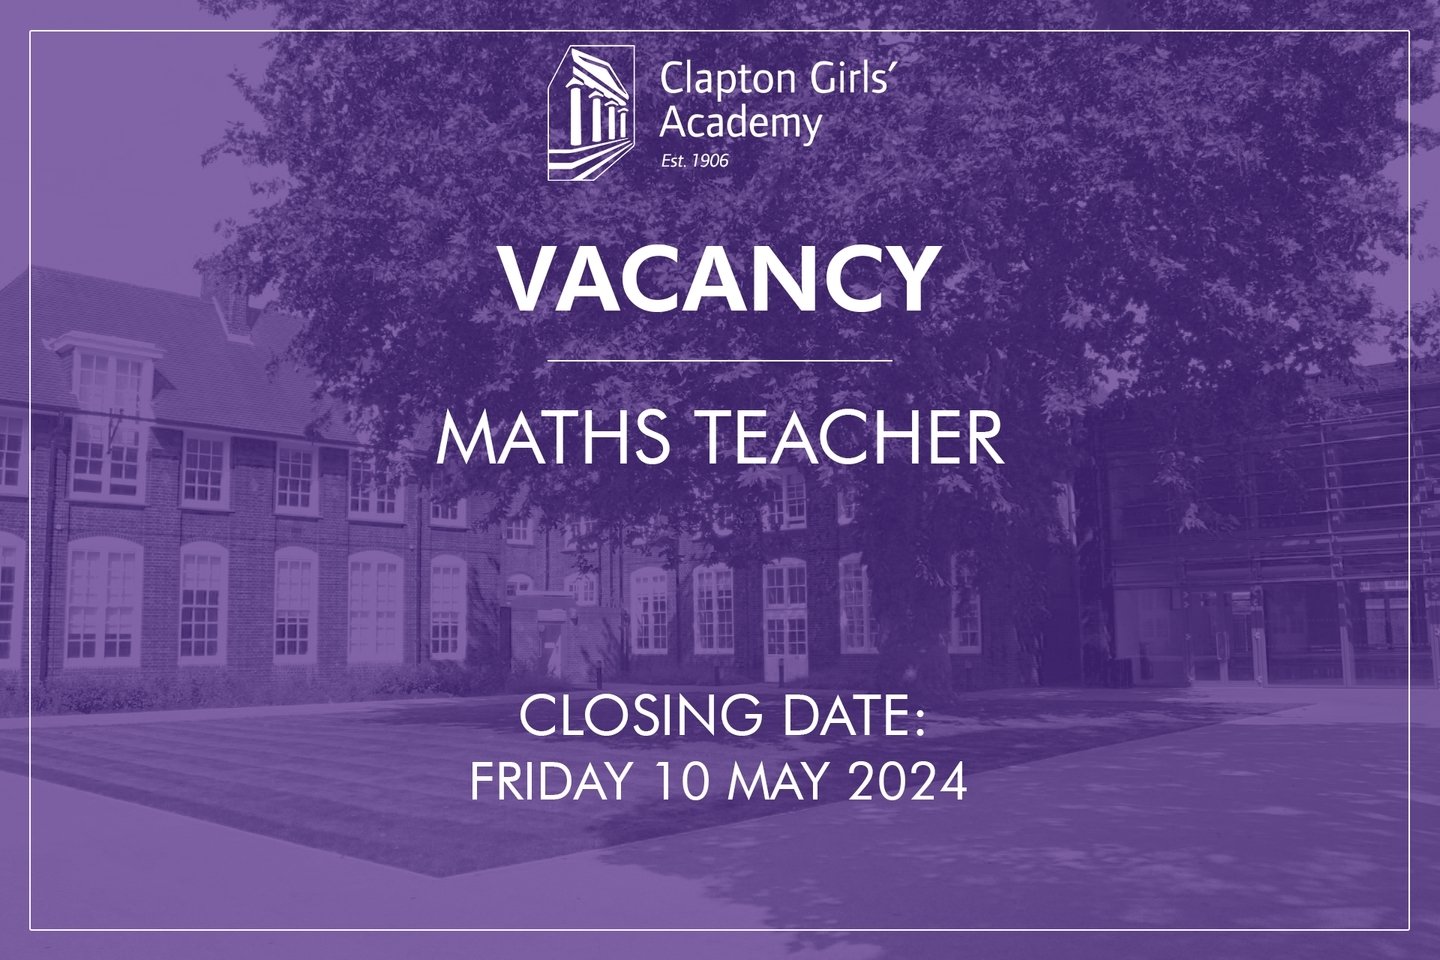 An opportunity has opened up at our academy‼️ 

If you have math teaching experience and enjoy shaping and educating the young minds, please click the link in our bio to apply now 📐⬆️

#applynow #jobvacancy #teaching #math #secondaryschool #cga